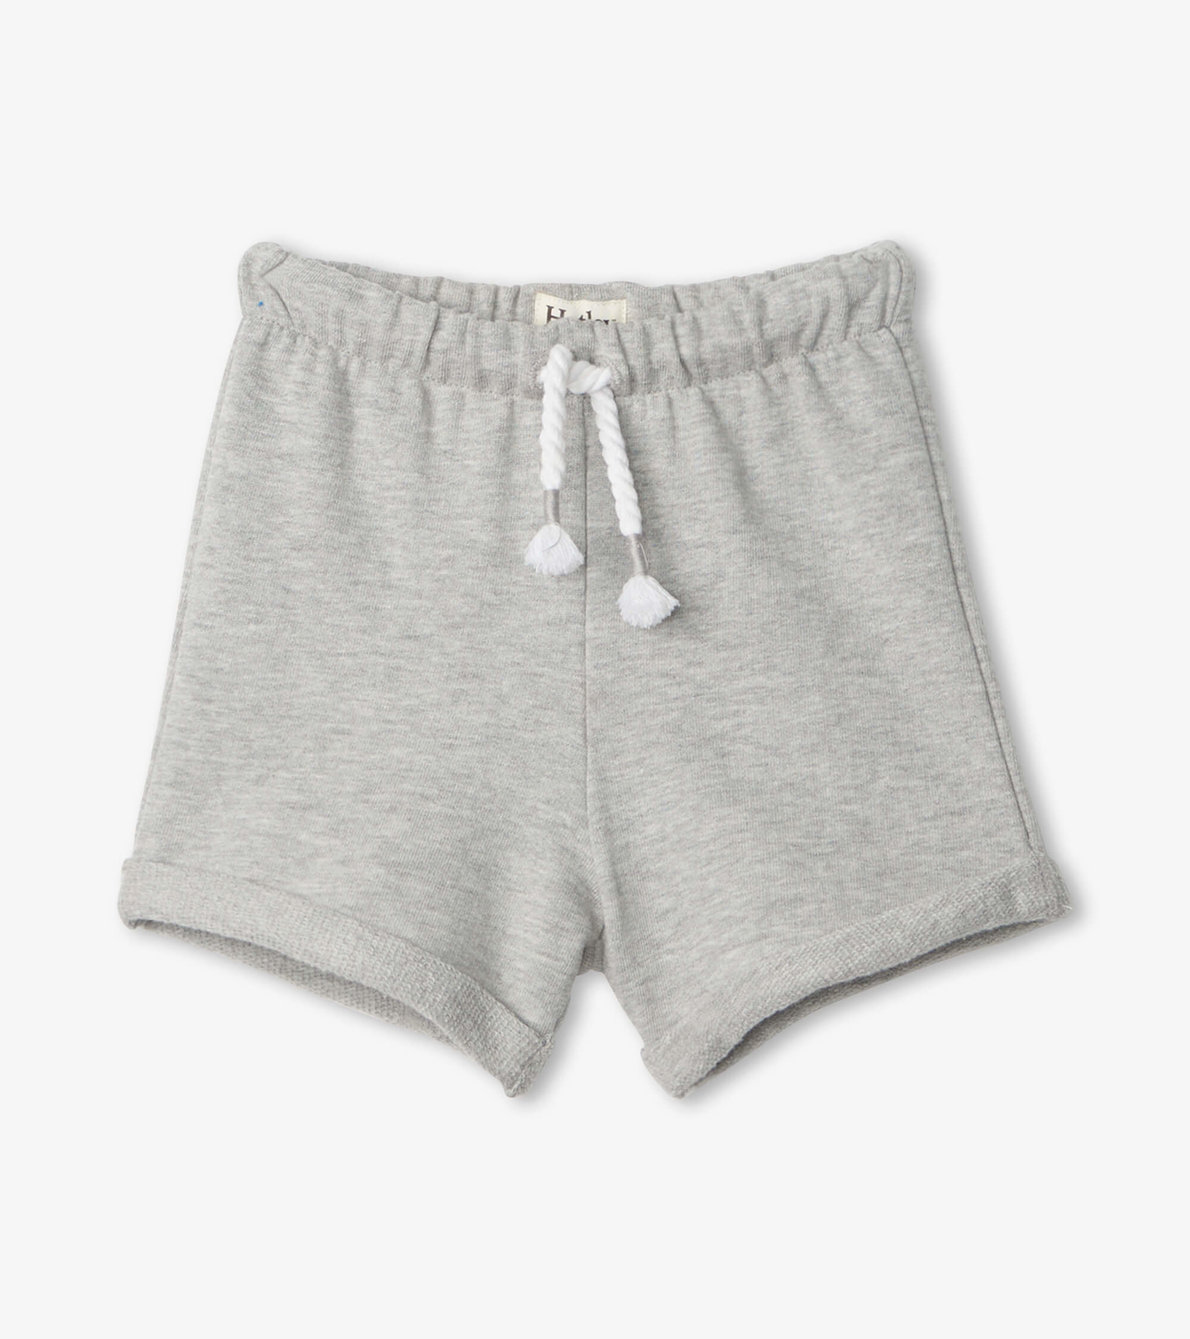 View larger image of Grey French Terry Baby Shorts